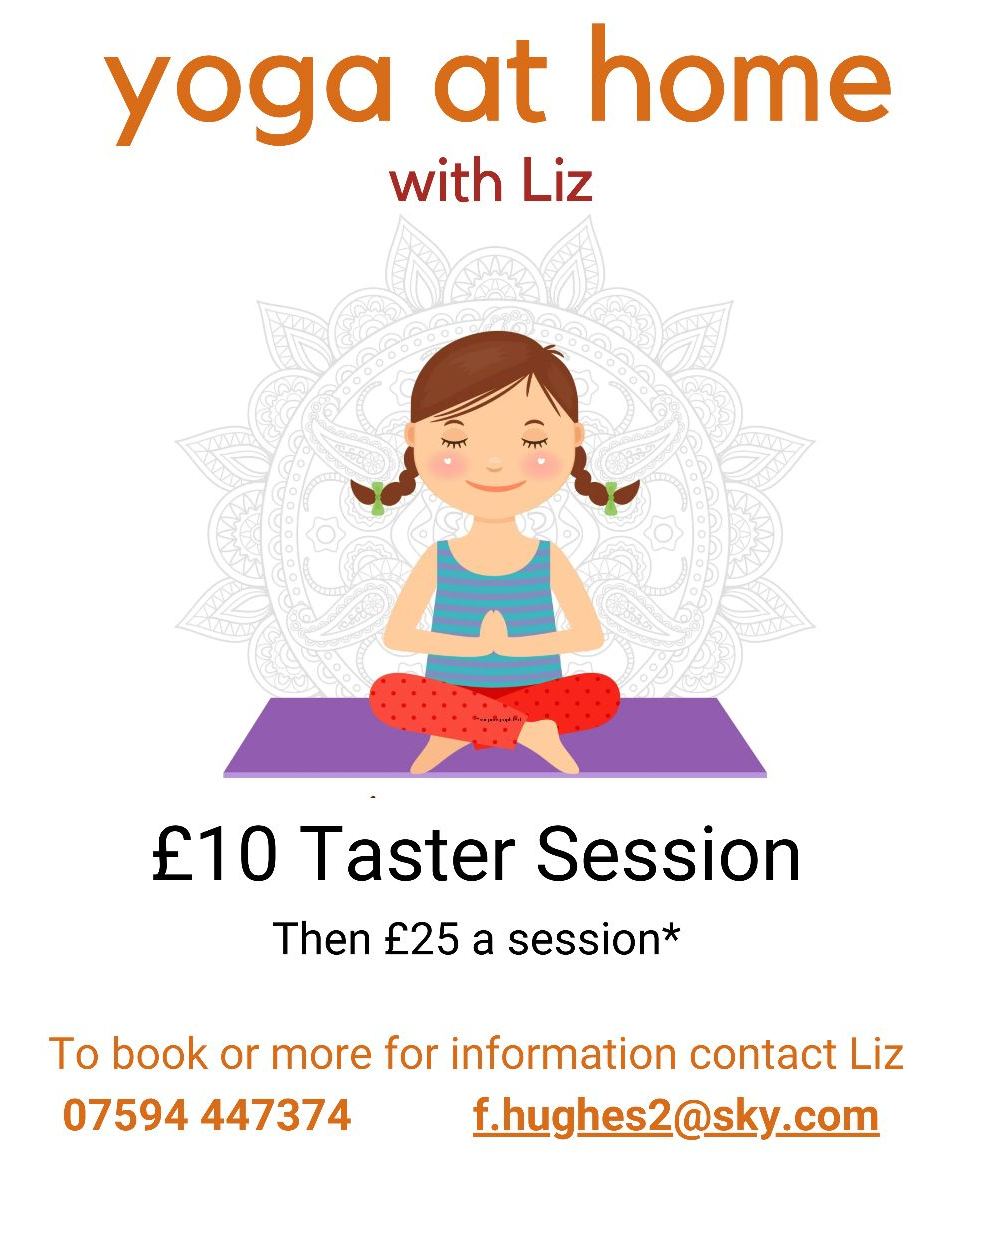 If you missed Liz's Family Yoga session for Skipton Now